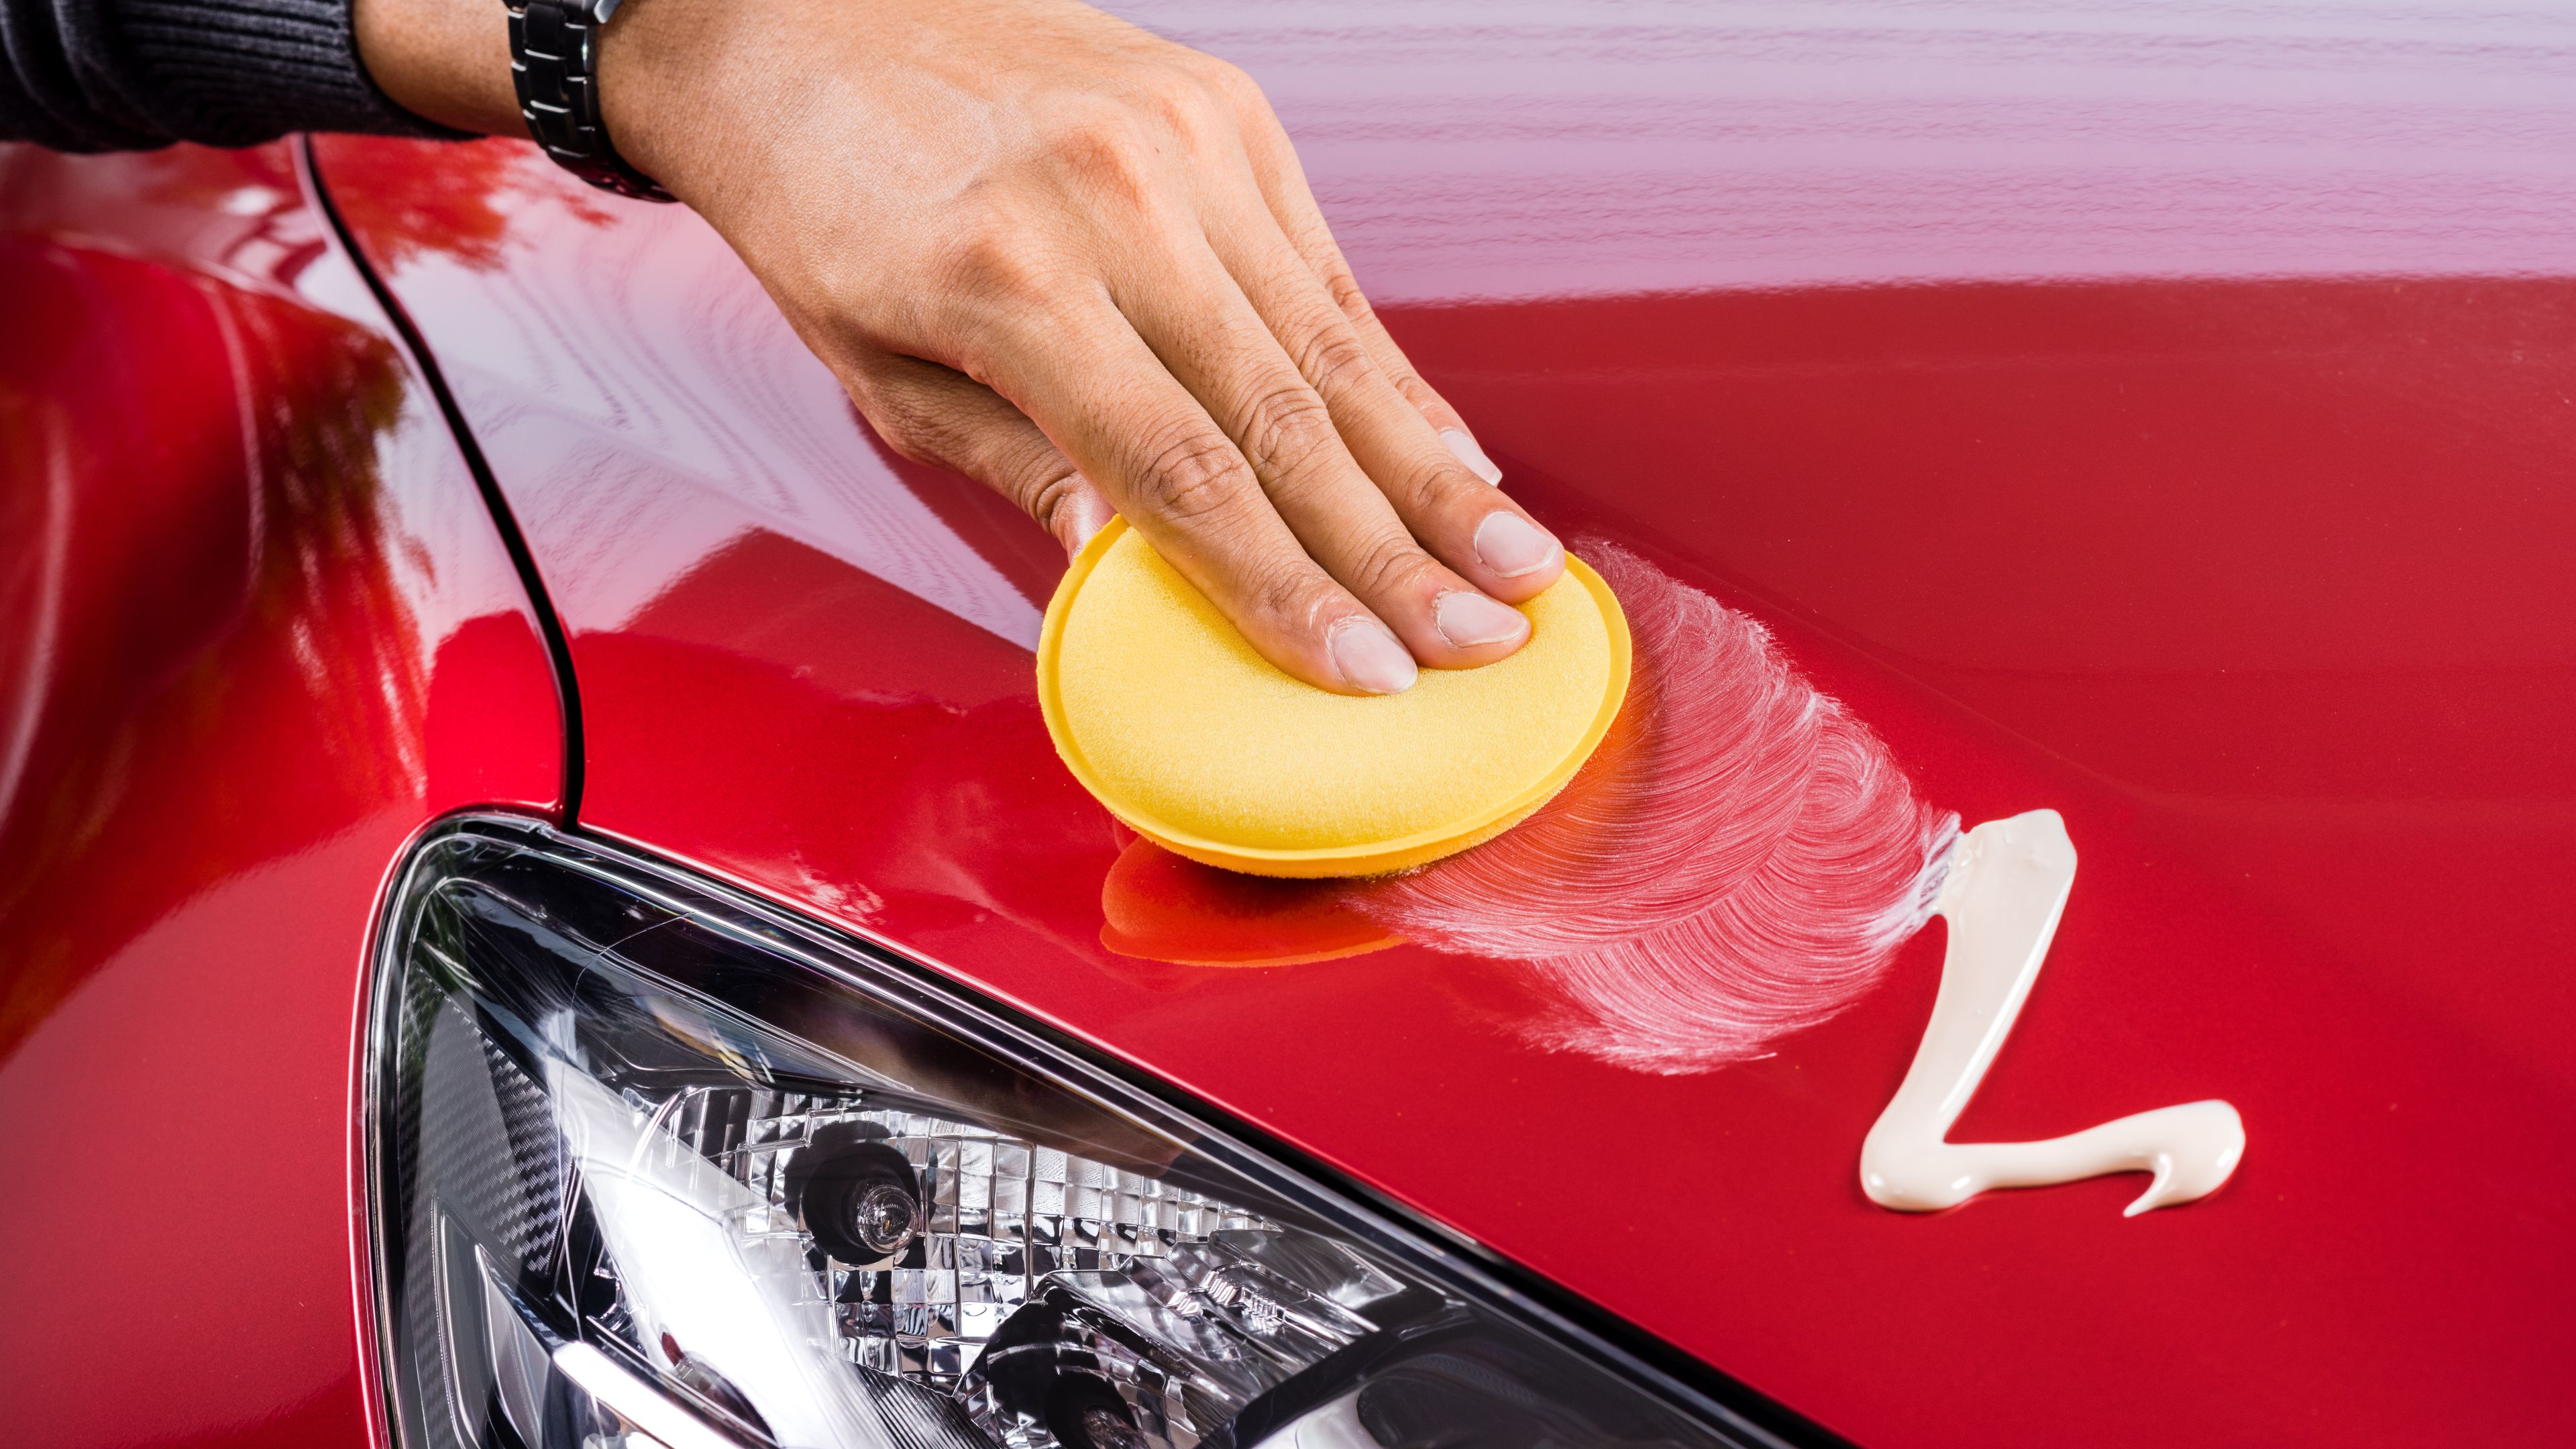 Best Car Scratch Remover - All That Gleams